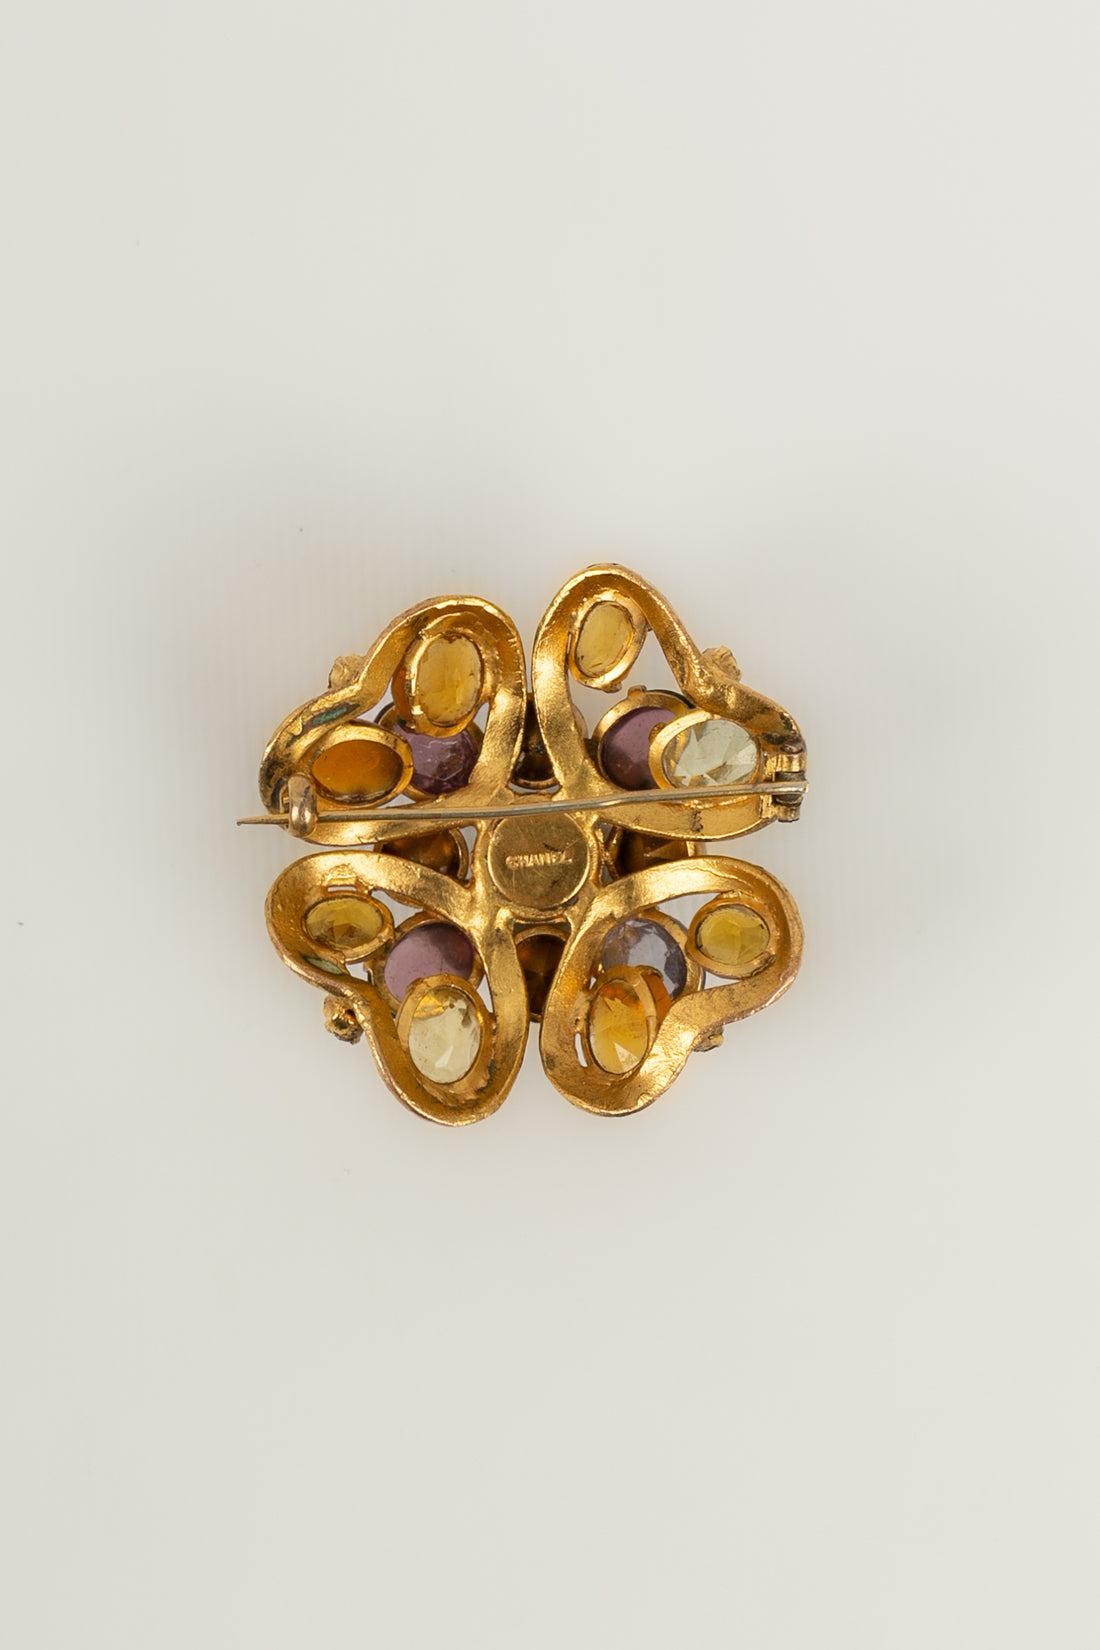 Chanel - Antique brooch in gilded metal, pearly fancy cabochon, glass paste cabochons, and rhinestones.

Additional information:
Condition: Very good condition
Dimensions: Diameter: 5 cm

Seller Reference: BRB124